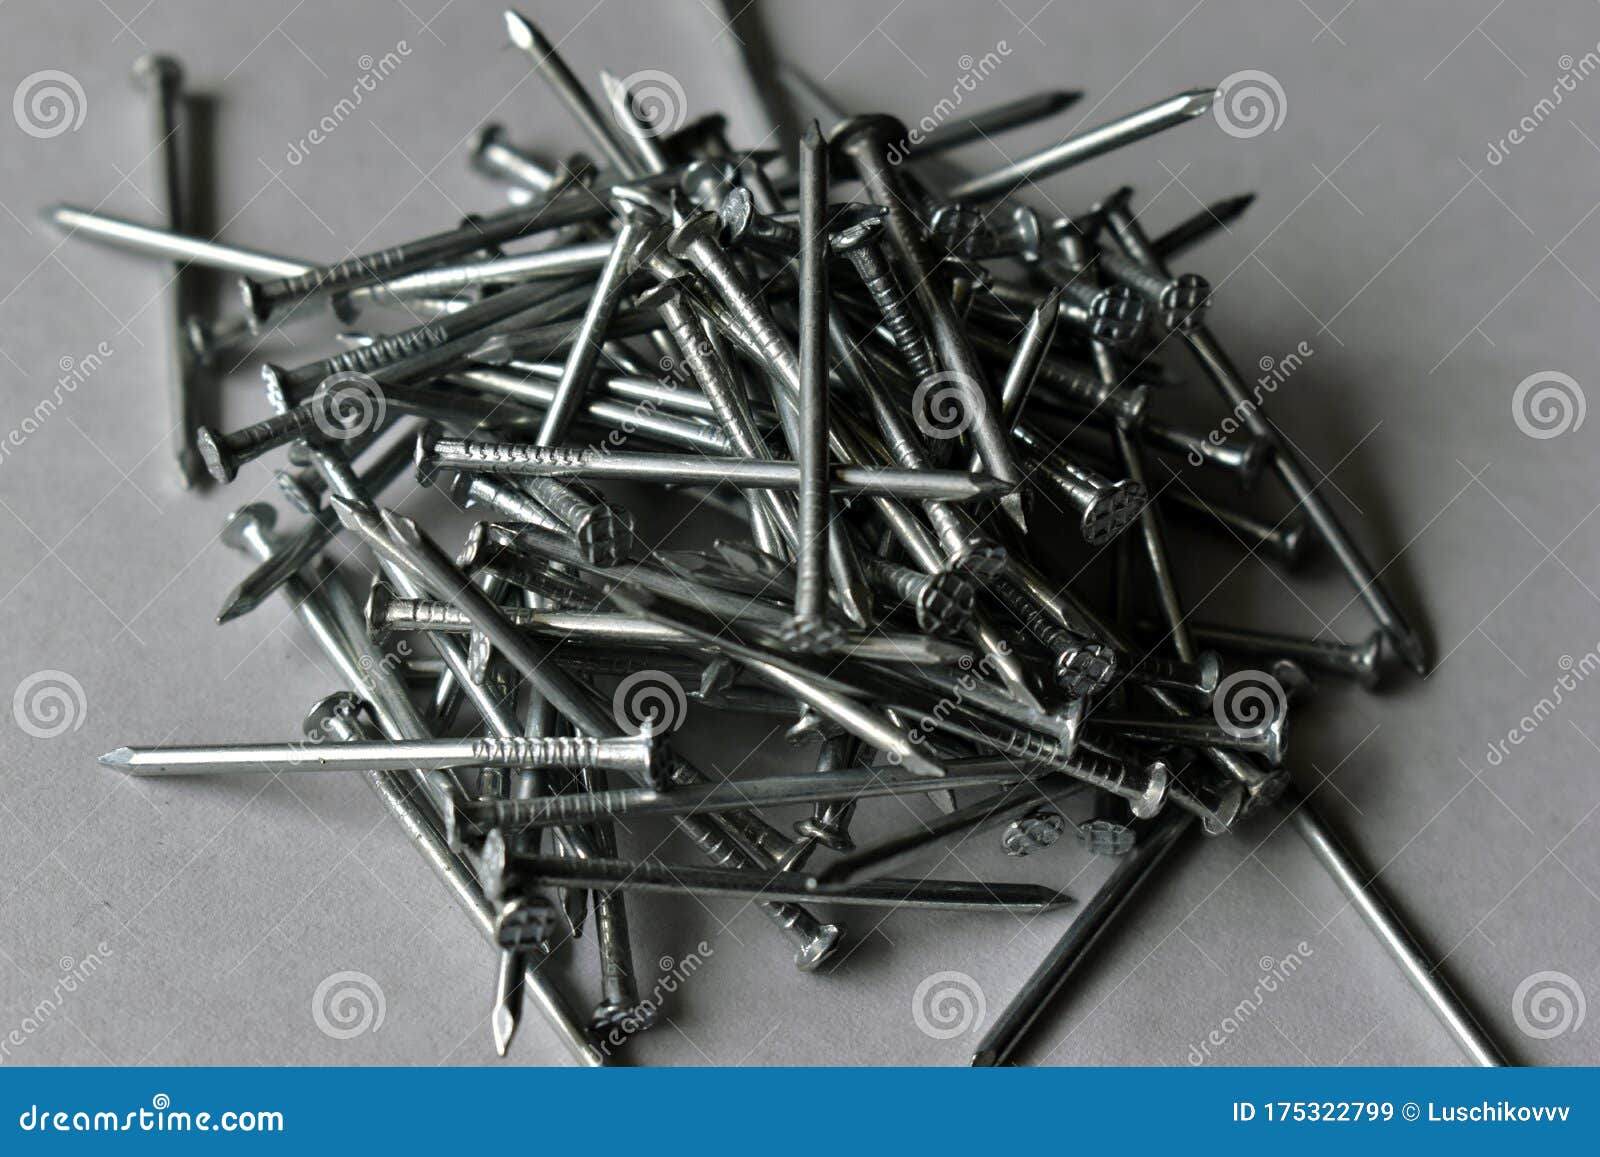 A Bunch Of Small Iron Nails On A White Background Stock Image - Image ...